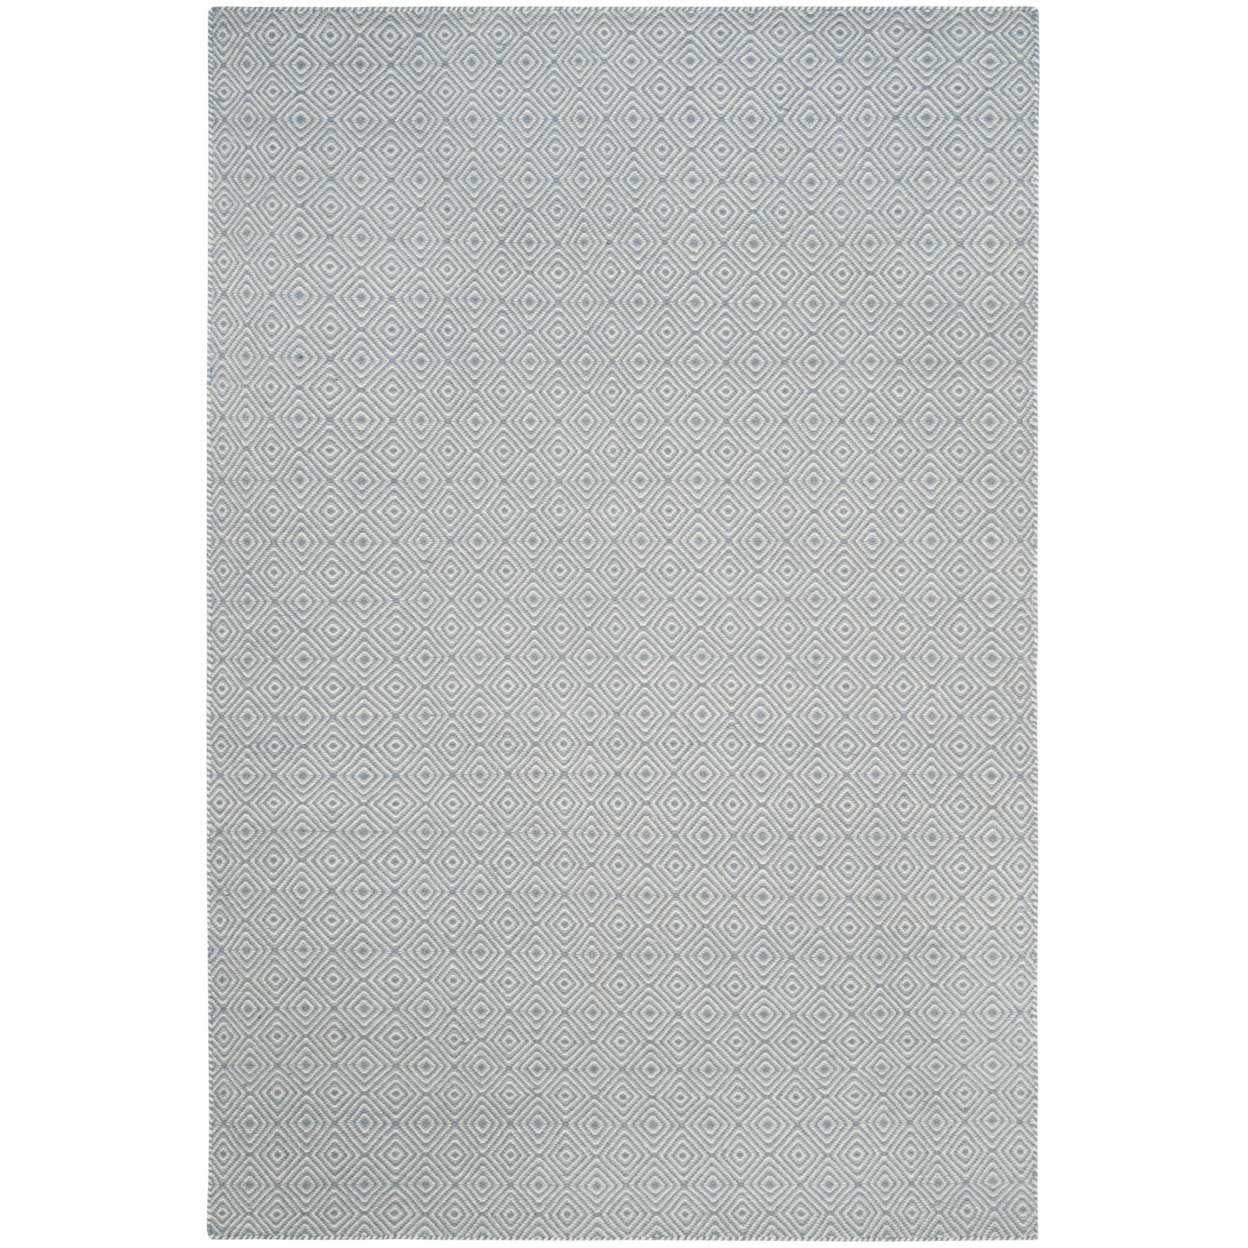 SAFAVIEH Oasis OAS525A Handwoven Silver / Ivory Rug - 9' X 12'